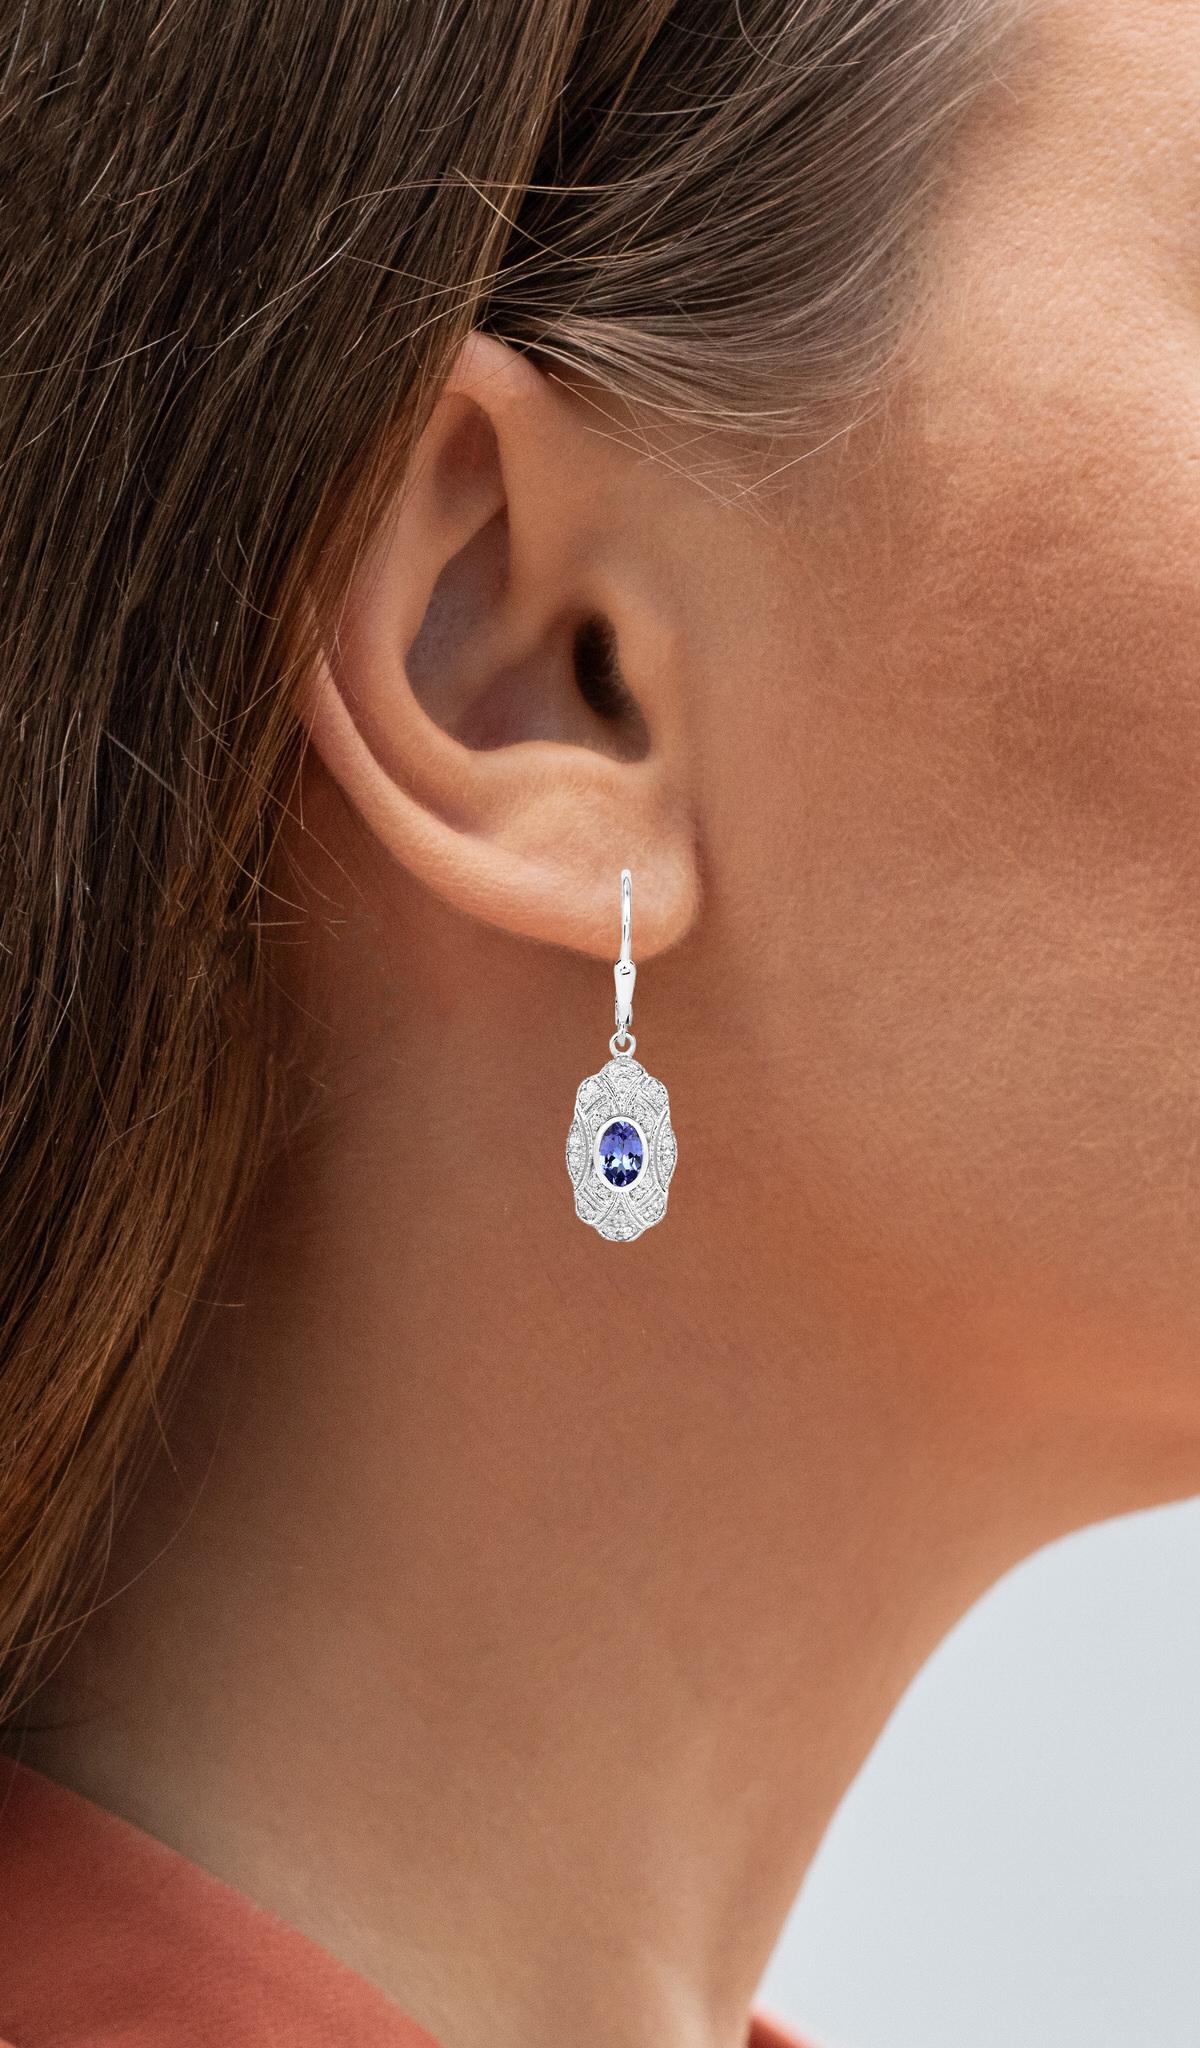 It comes with the Gemological Appraisal by GIA GG/AJP
All Gemstones are Natural in Origin
2 Tanzanites = 0.90 Carats
52 White Topazes = 0.26 Carats
Metal: Rhodium Plated Sterling Silver
Level Back
Dimensions: 35 x 11 mm